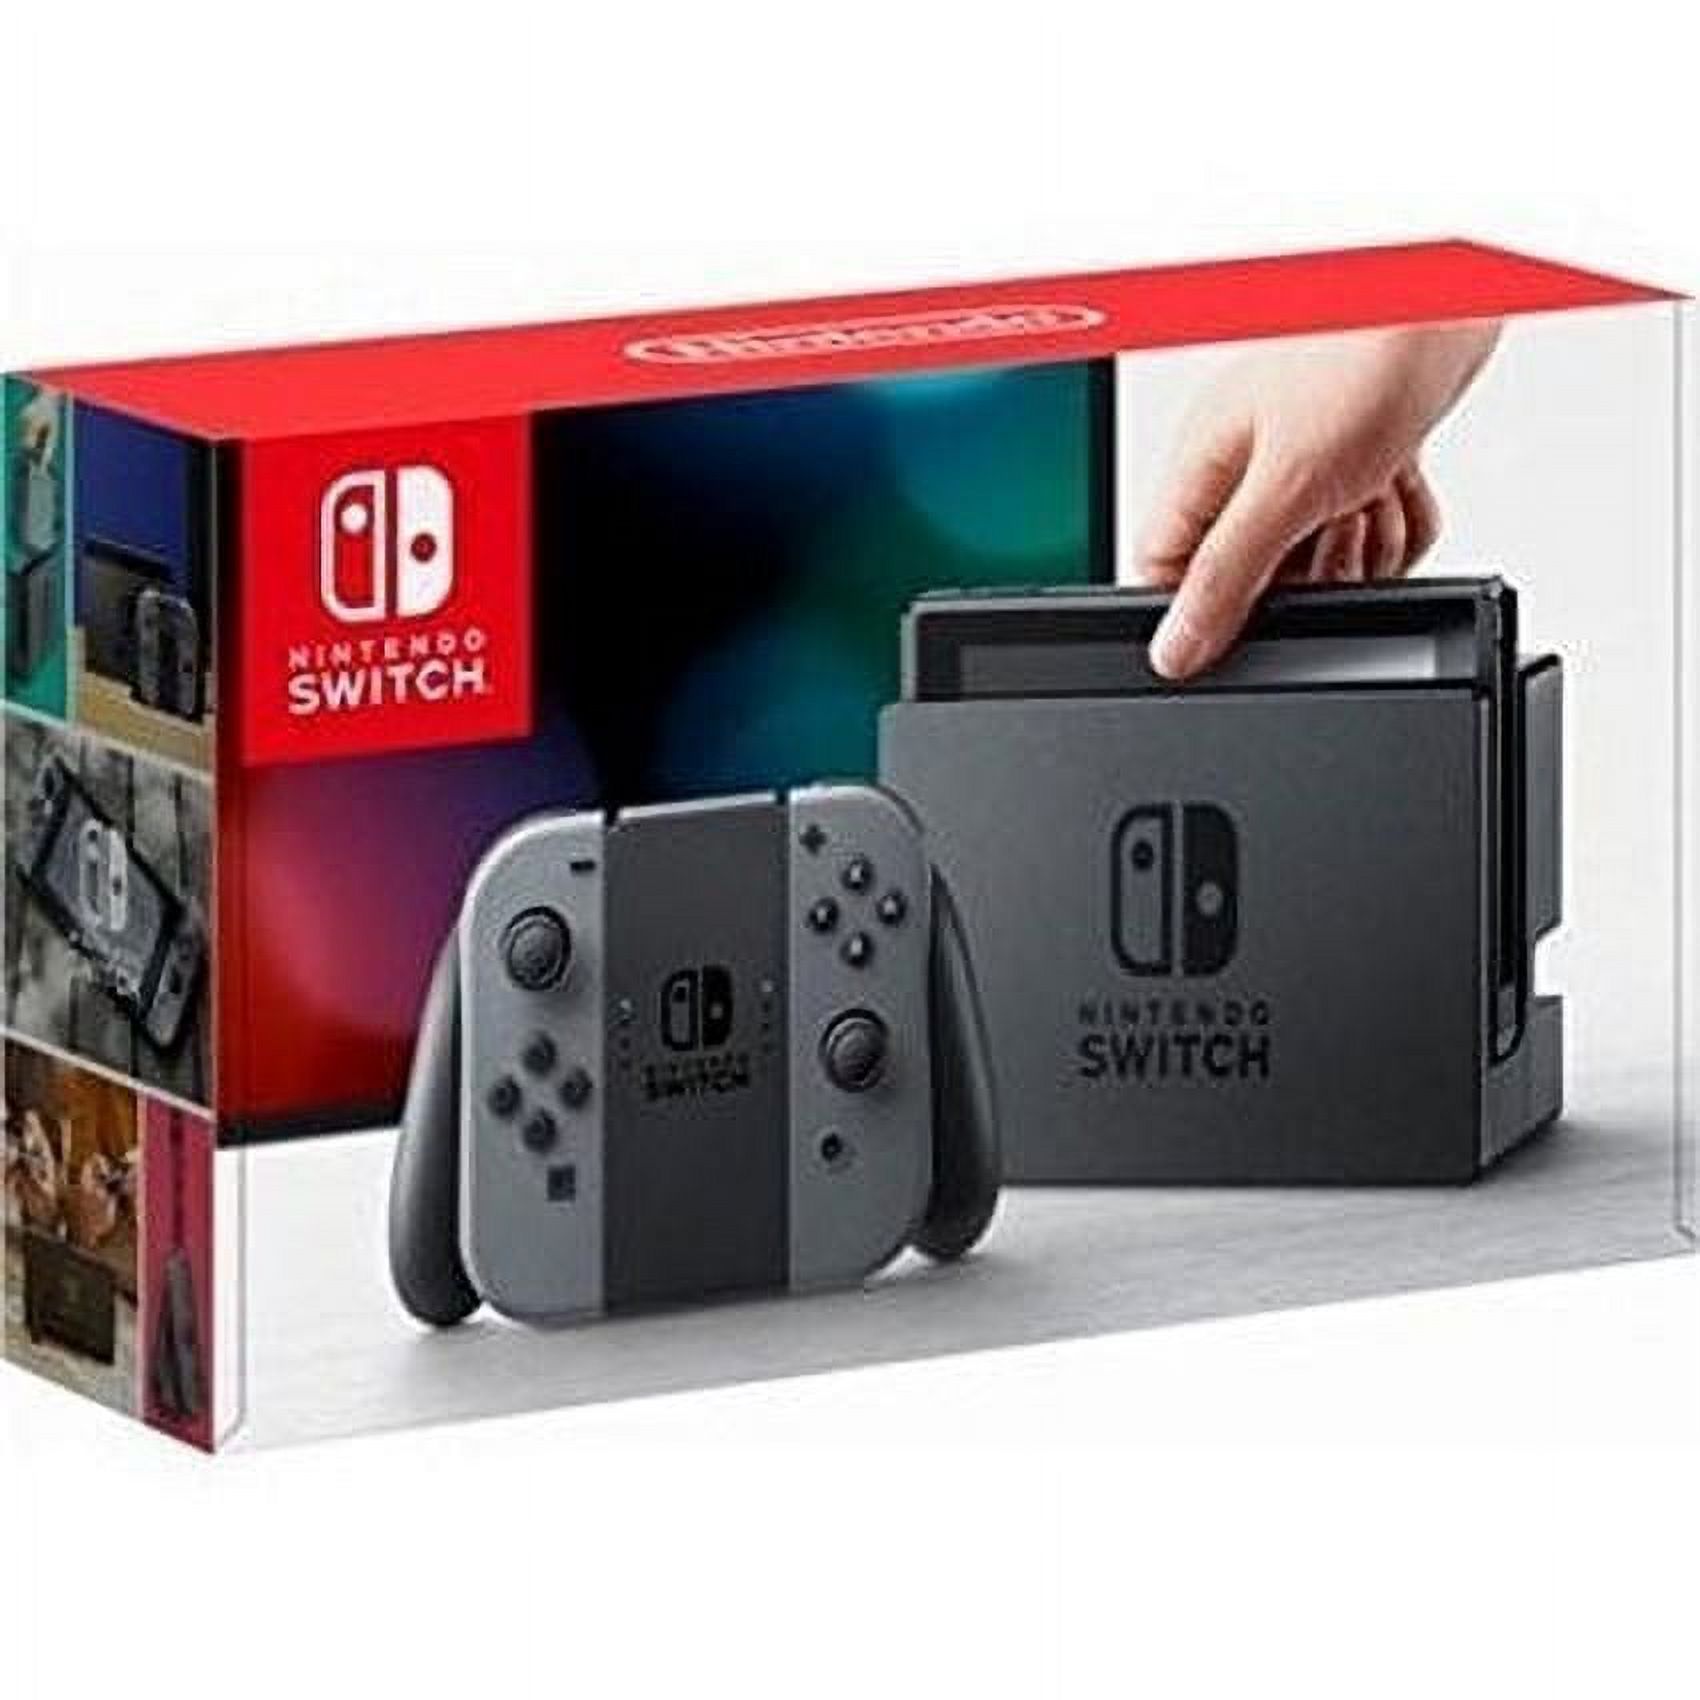 Nintendo Switch Console With Gray Joy-Con (2019) - image 3 of 5